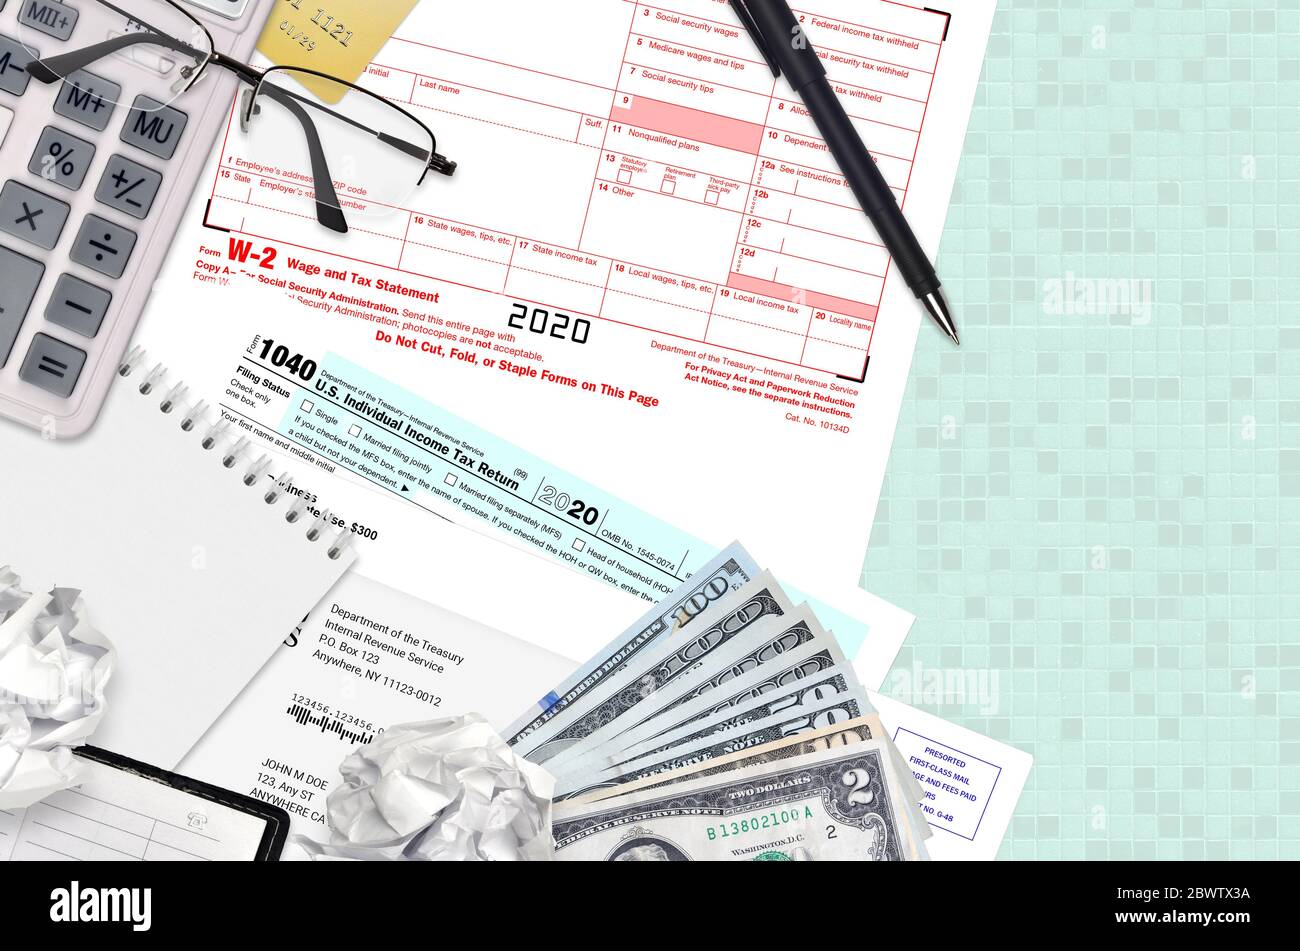 Irs Form 1040 Individual Income Tax Return And W 2 Wage And Tax Statement Lies On Office Table 1301